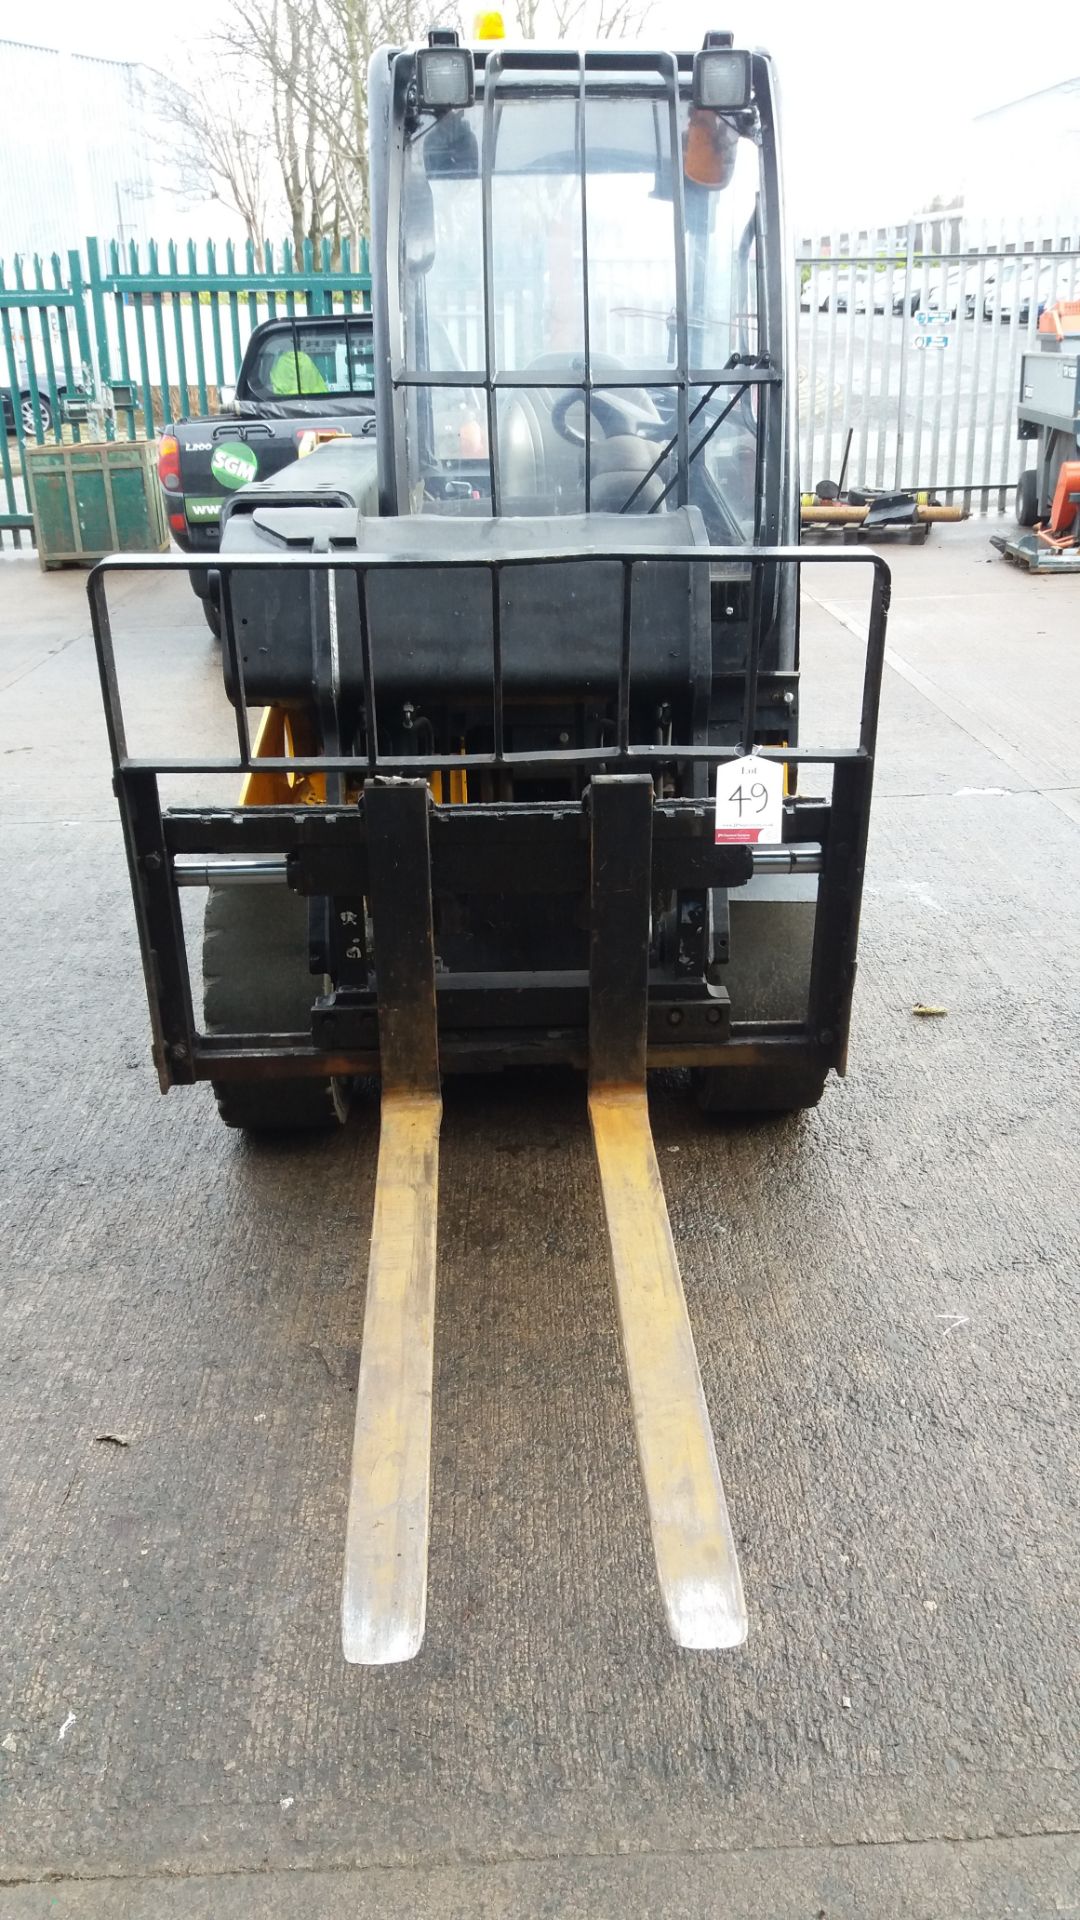 JCB TLT30 Teletruk counterbalance forklift with telescopic boom - Image 2 of 22